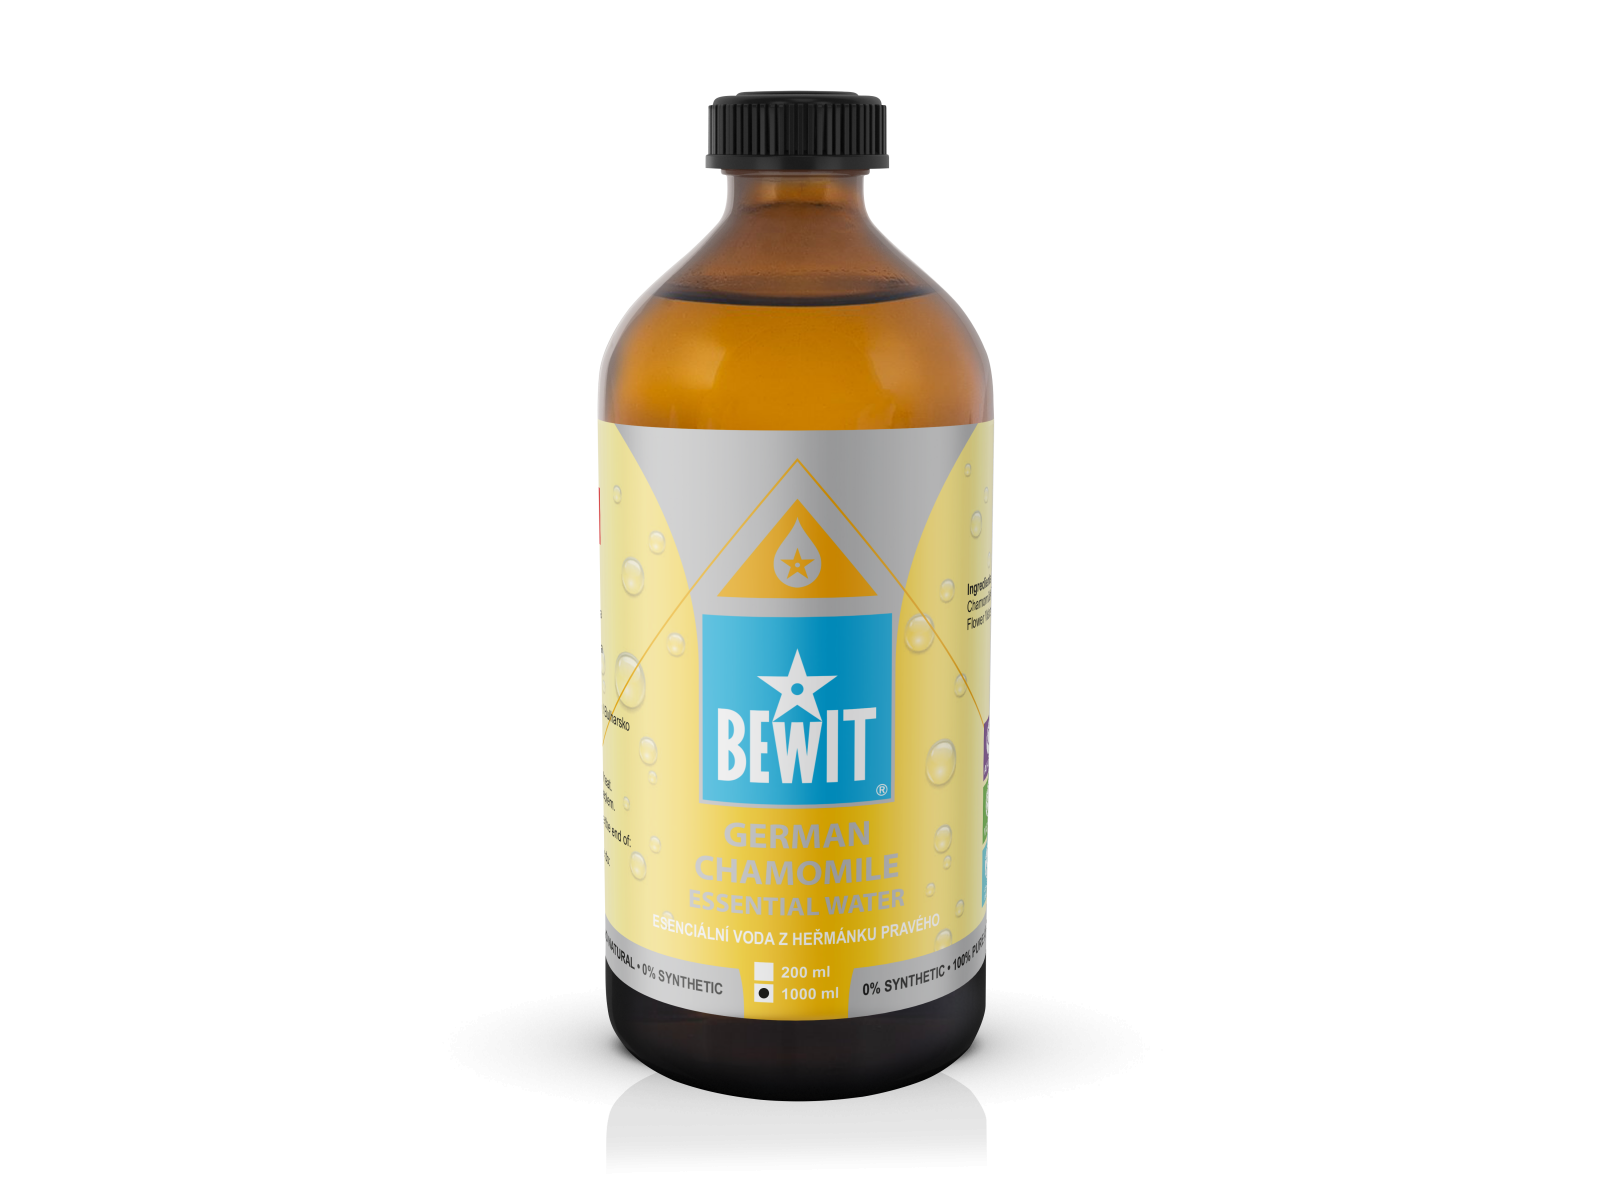 BEWIT Chamomile essential water - 100% NATURAL HYDROLYTE - 3